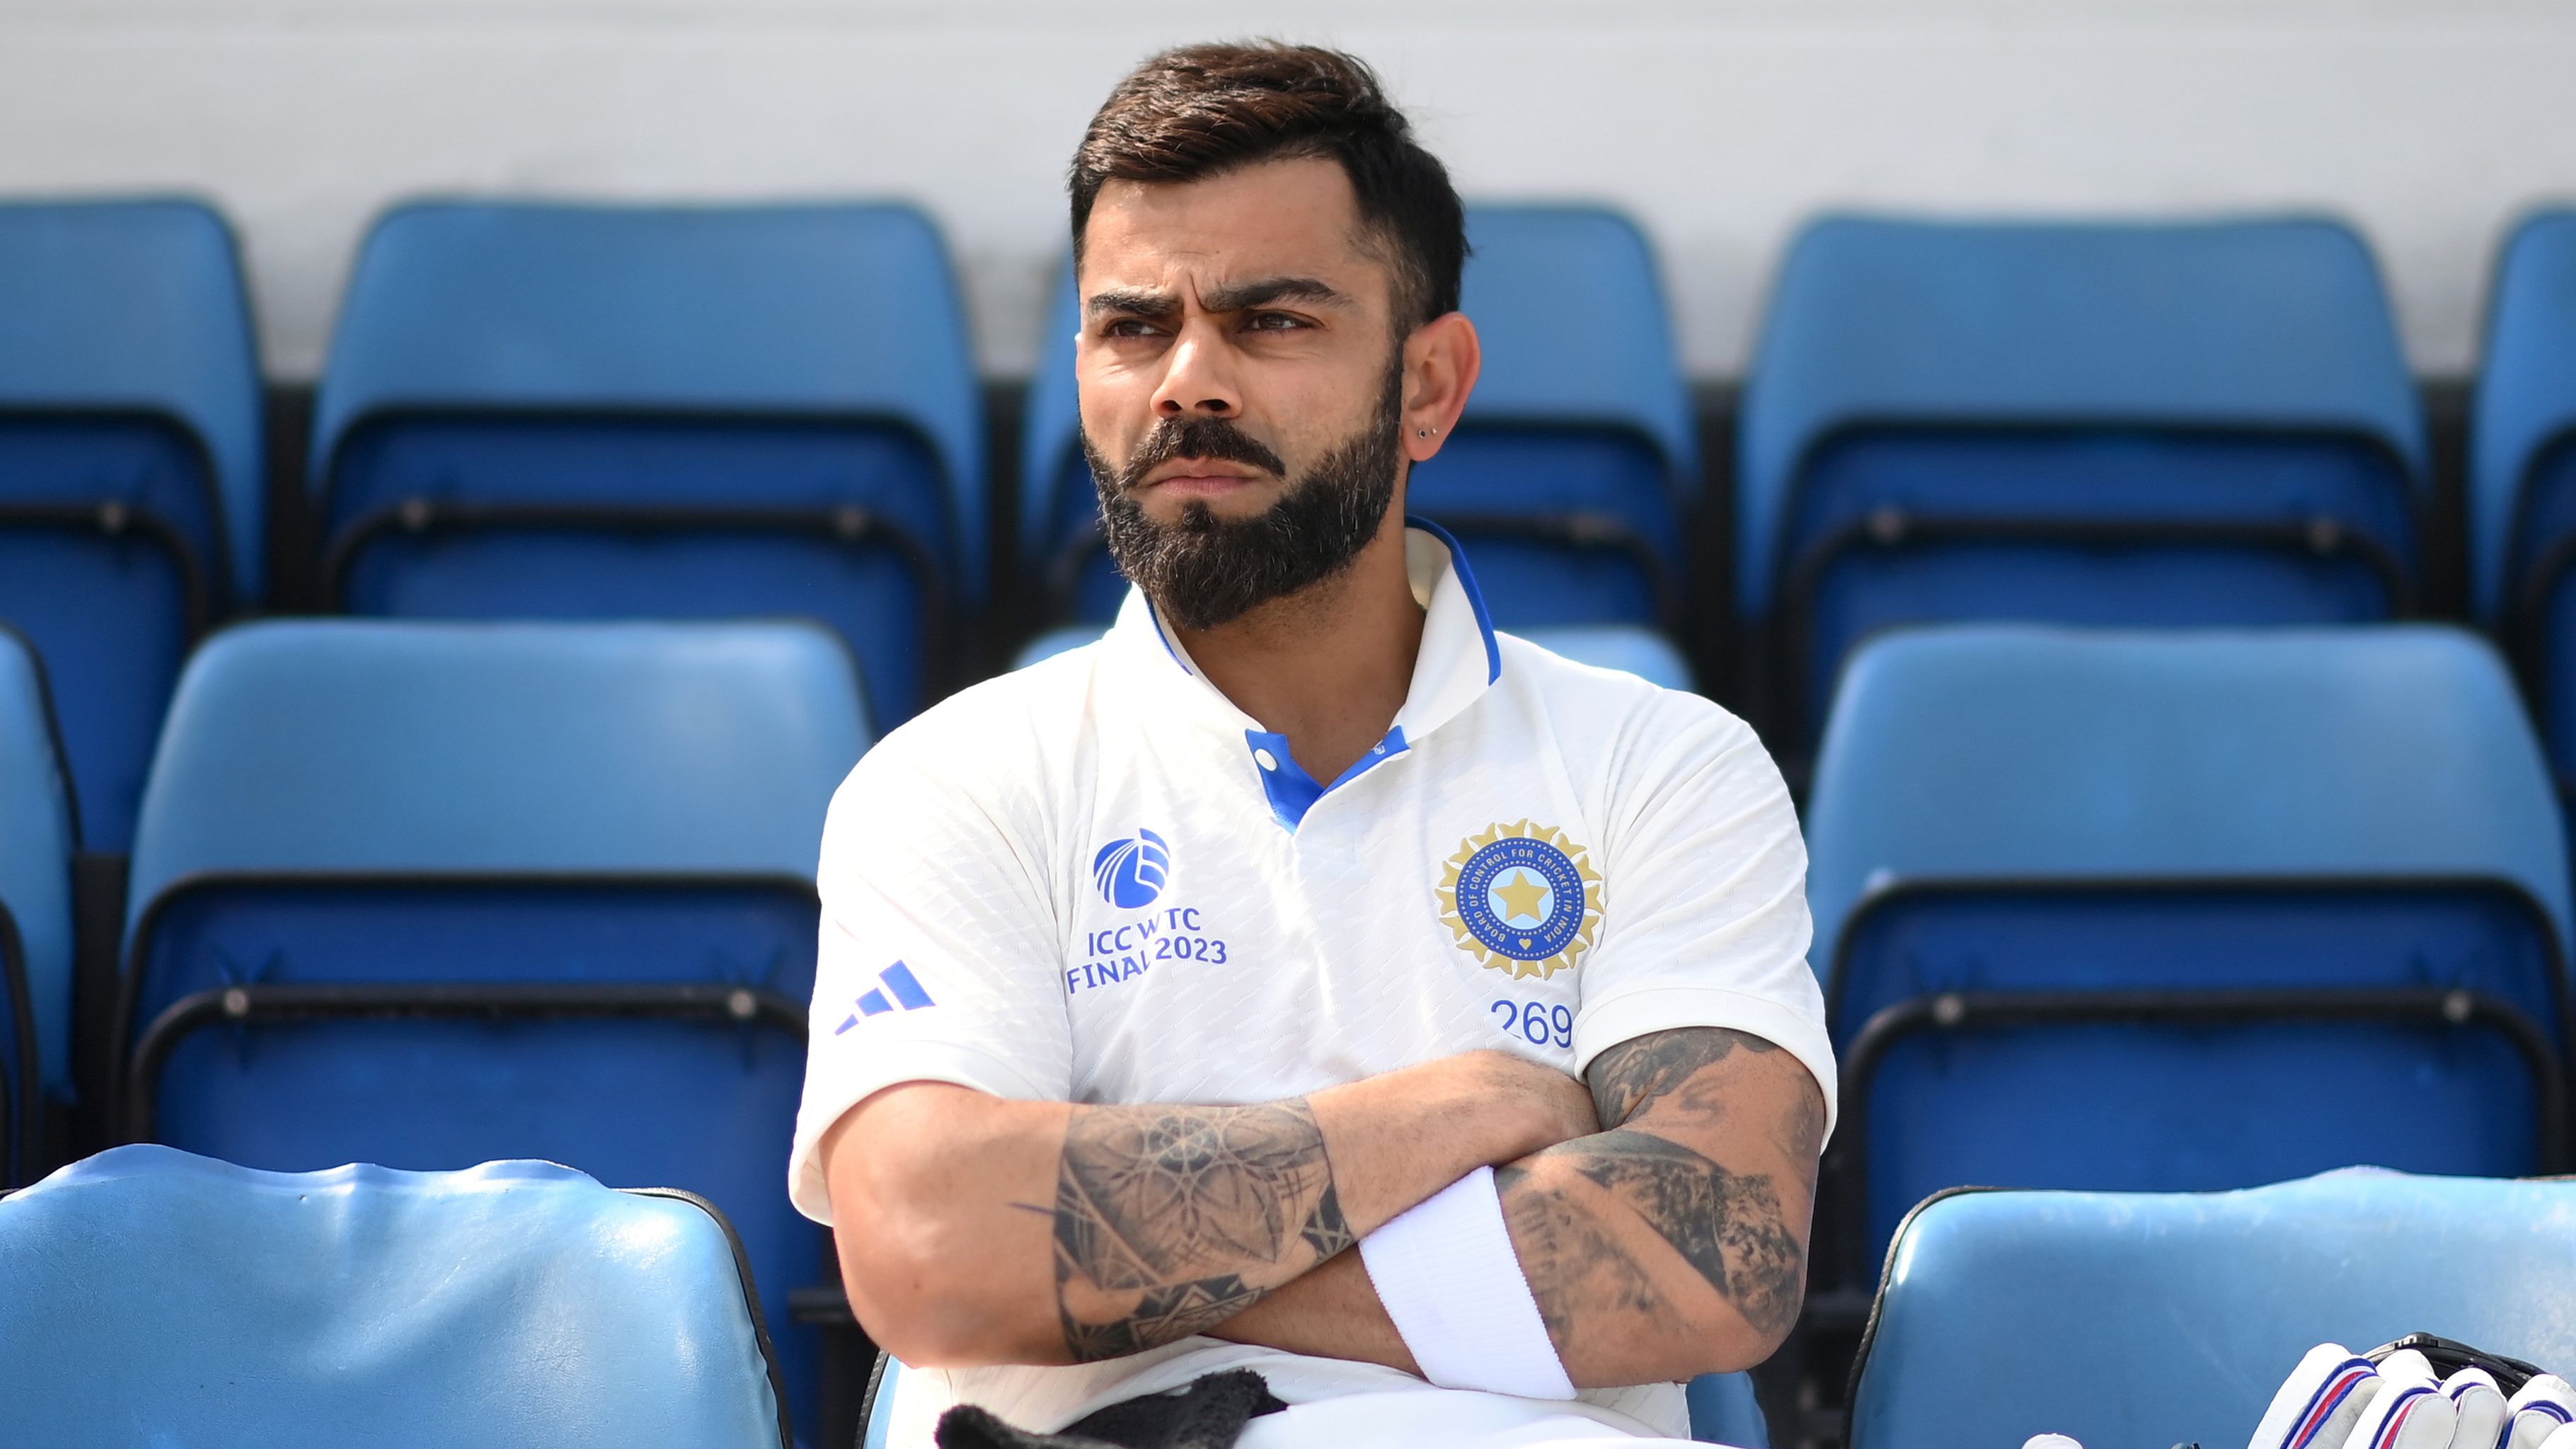 Virat Kohli of India waits before batting during day five of the ICC World Test Championship Final between Australia and India at The Oval on June 11, 2023 in London, England. (Photo by Alex Davidson-ICC/ICC via Getty Images)